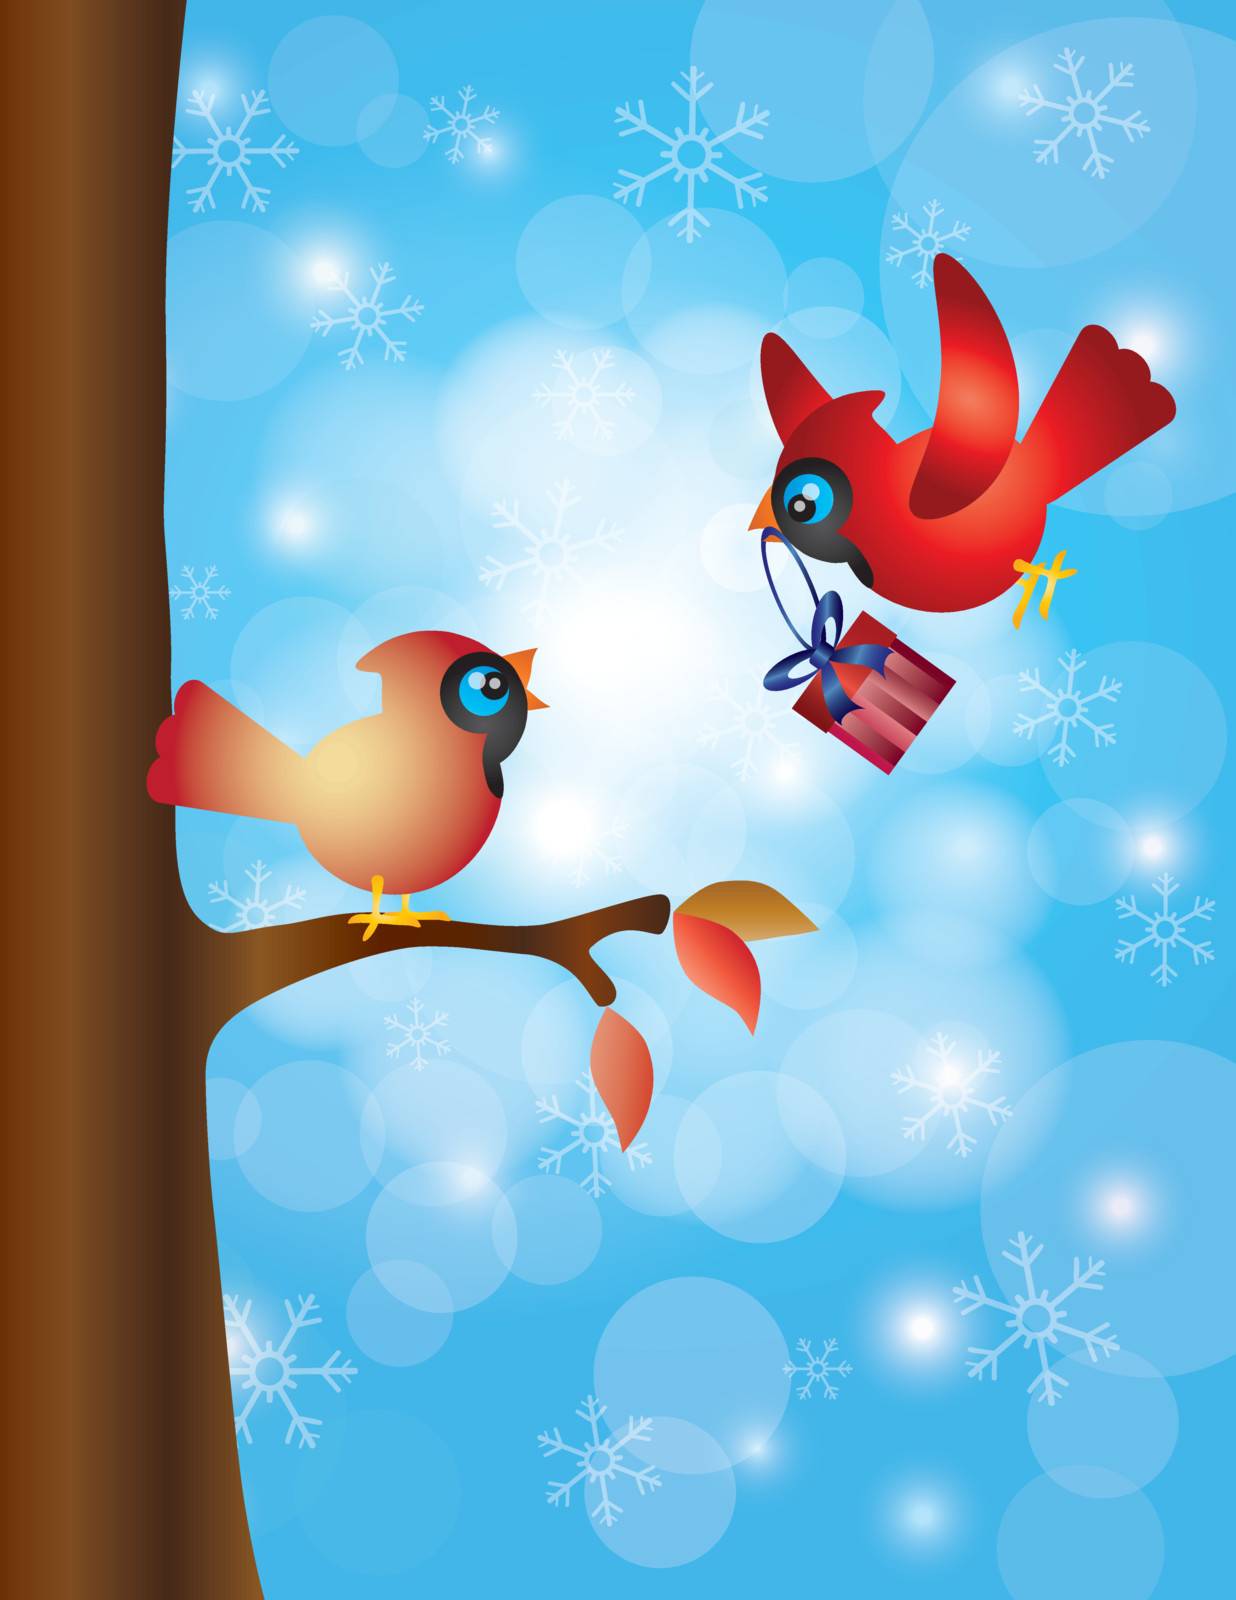 Cardinal Male Bringing Christmas Gift for Female Perched on a Tree Branch with Snowflakes Background Illustration